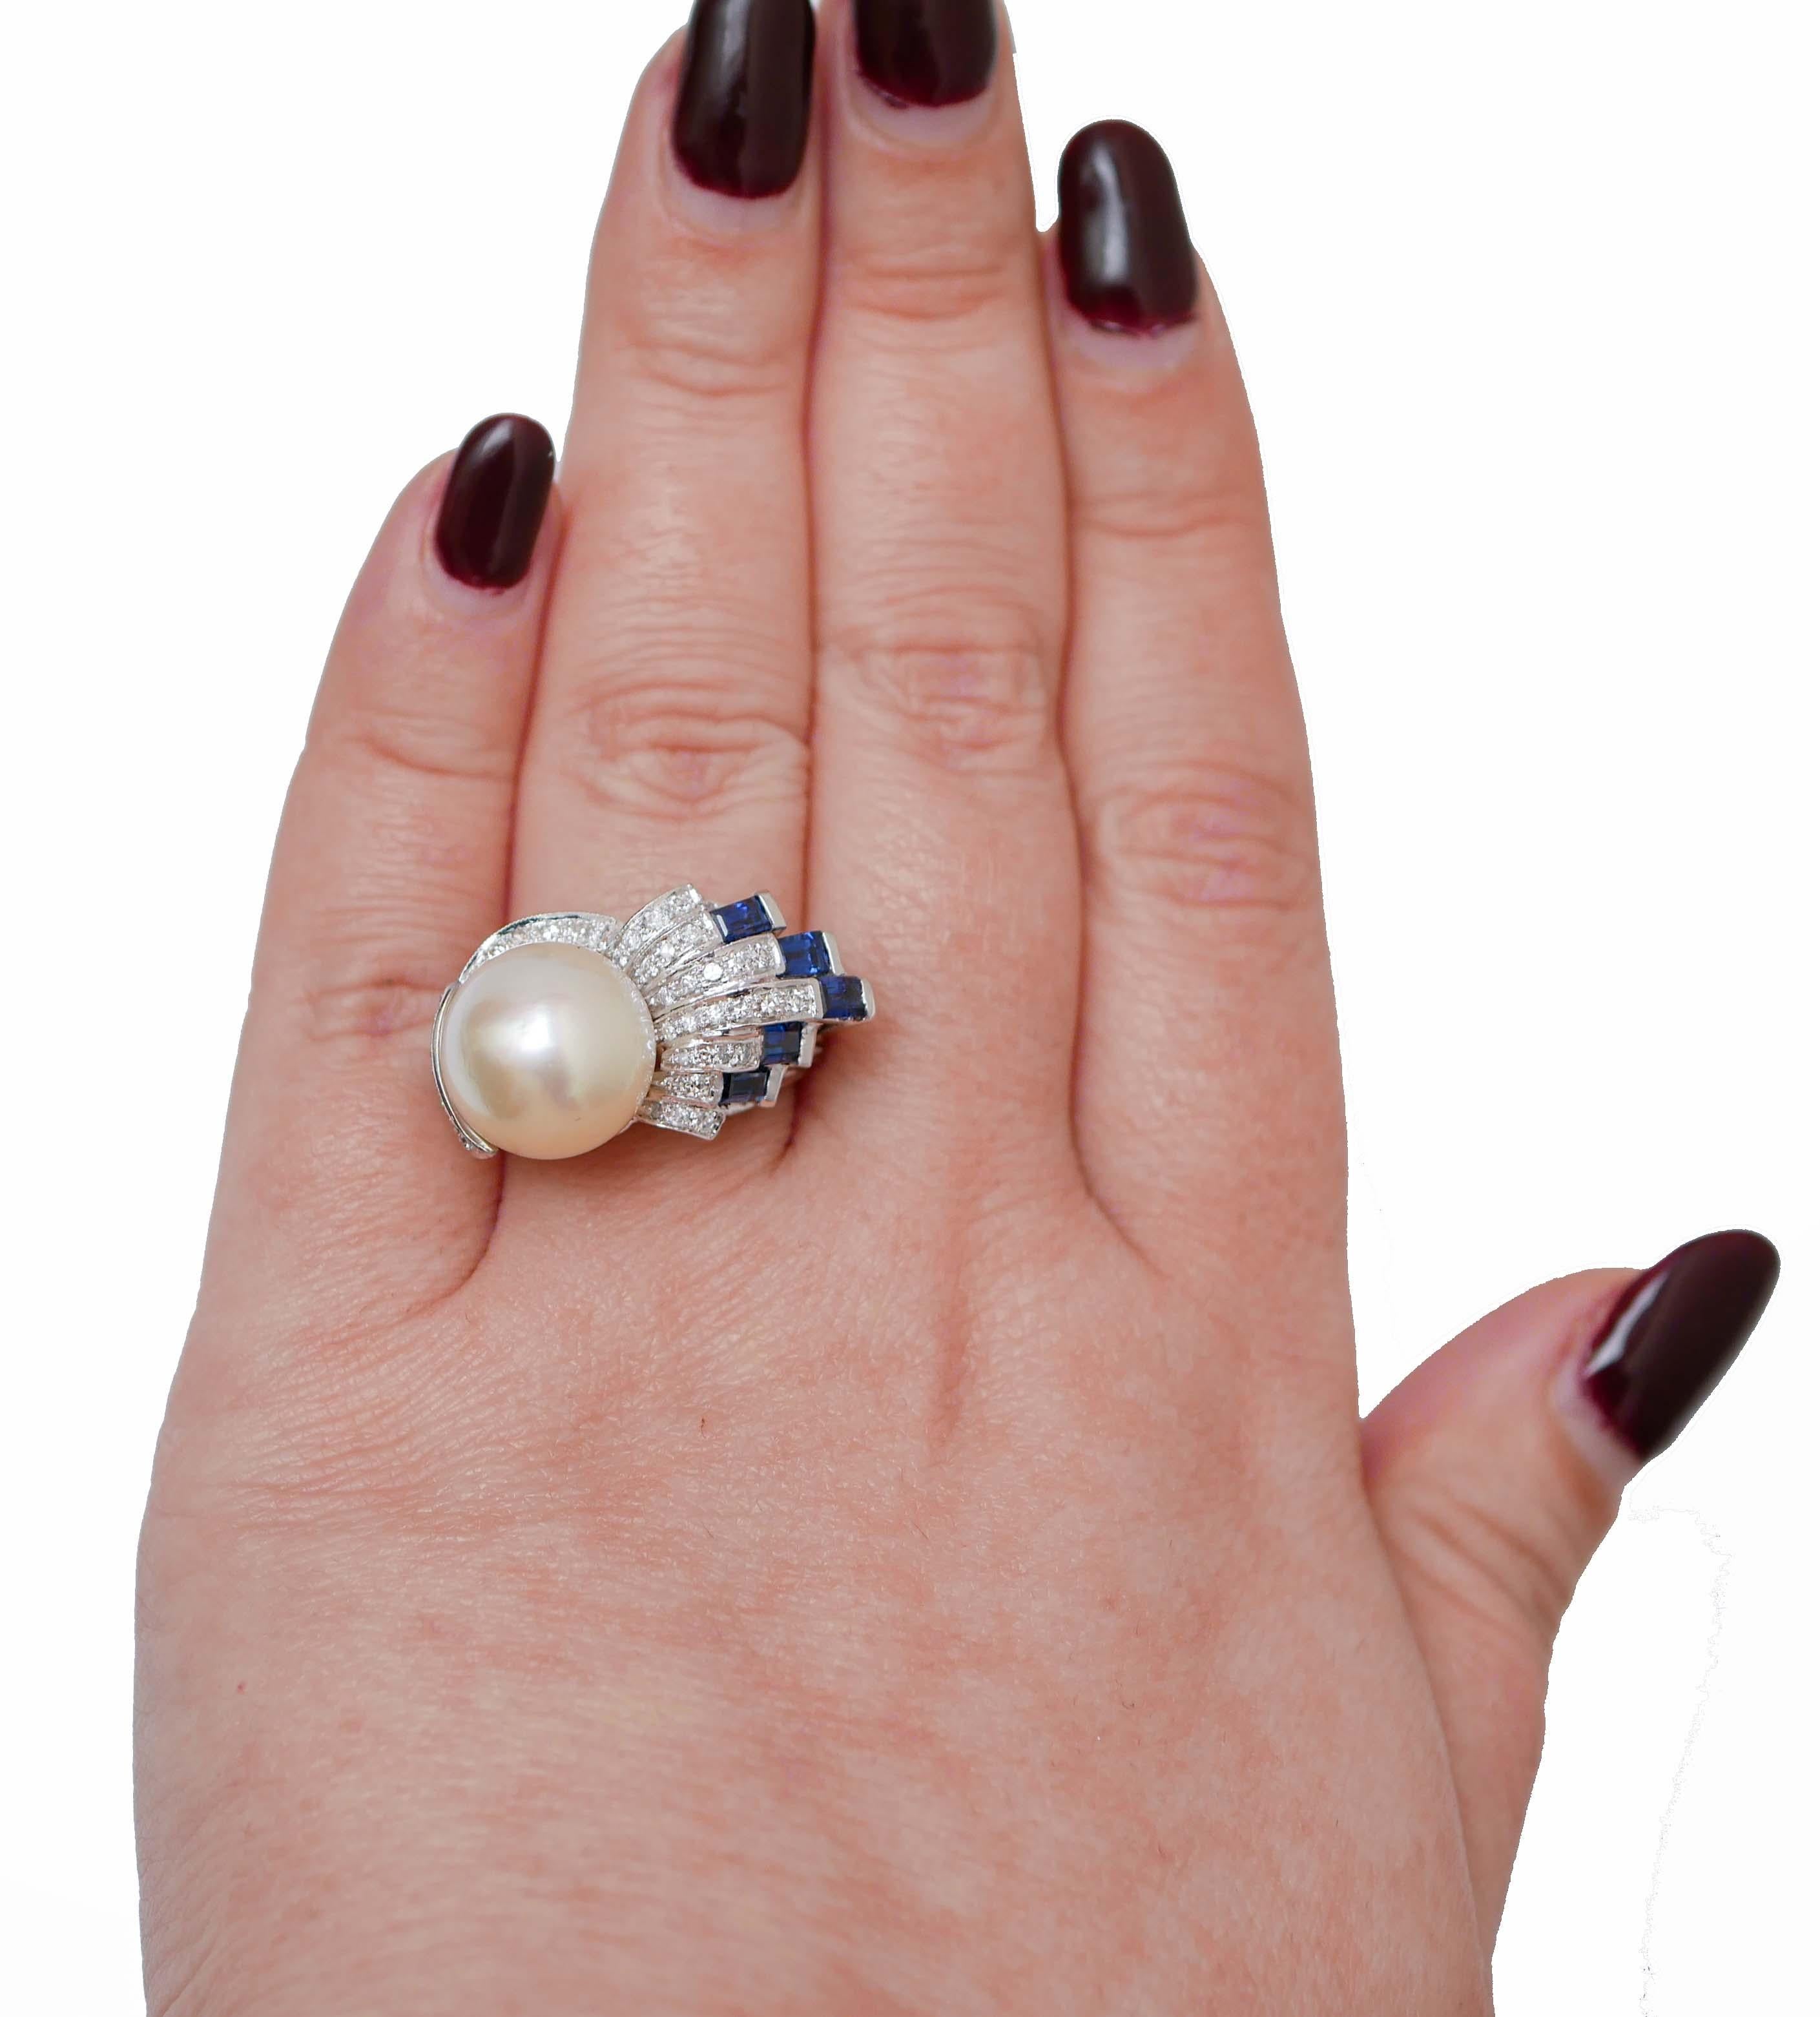 Mixed Cut White Pearl, Sapphires, Diamonds, Platinum Ring. For Sale